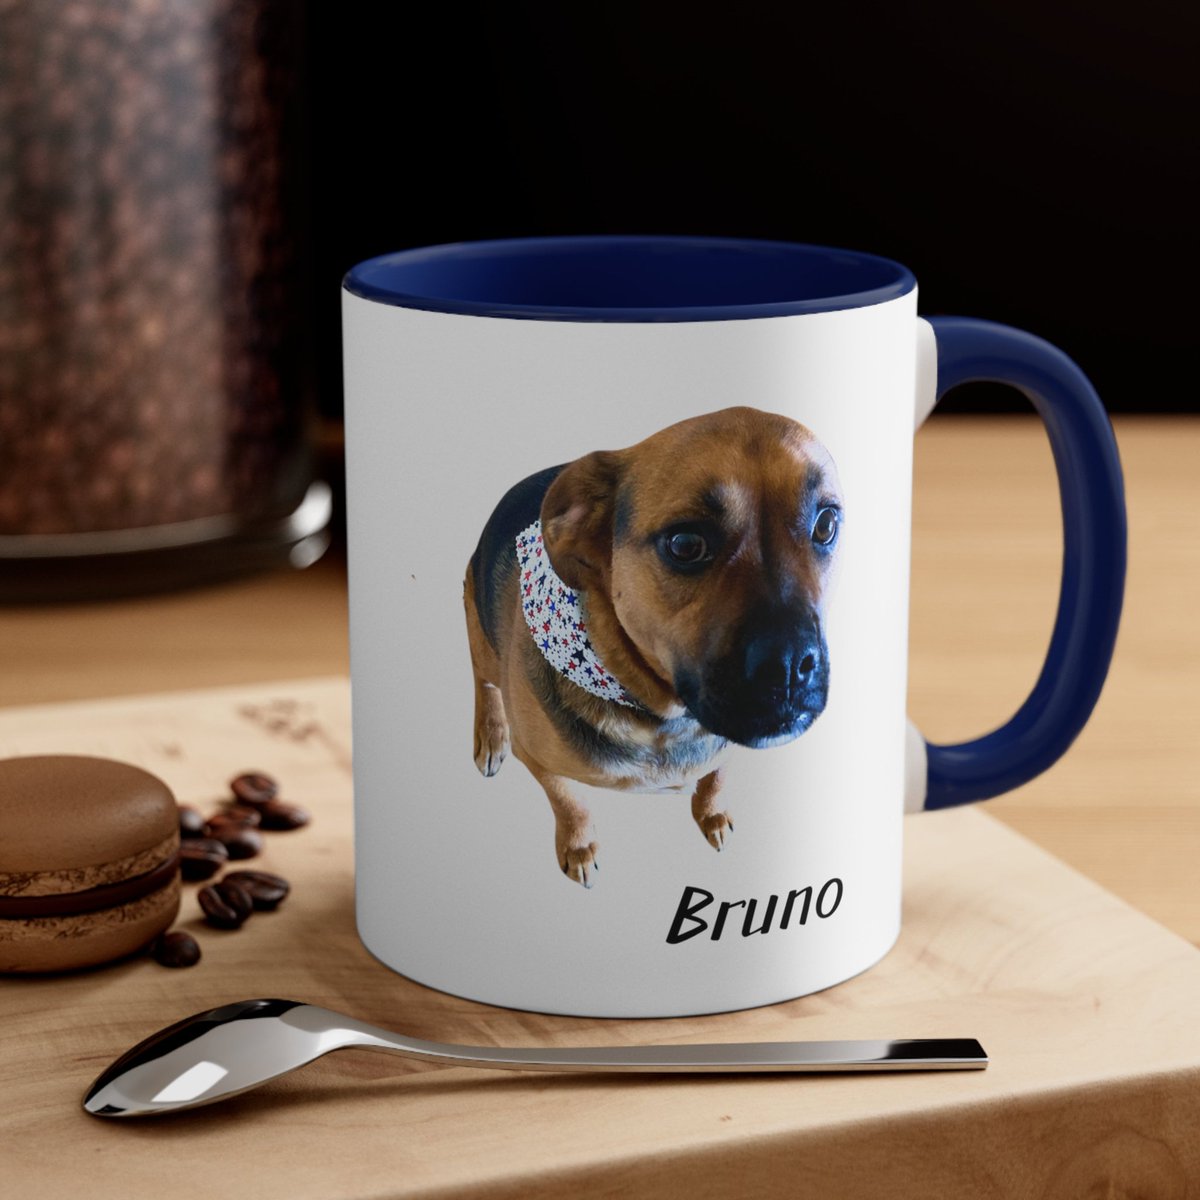 Personalized mugs of your beloved animals.  #giftidea #PersonalizedProducts #doglovers #AnimalLovers